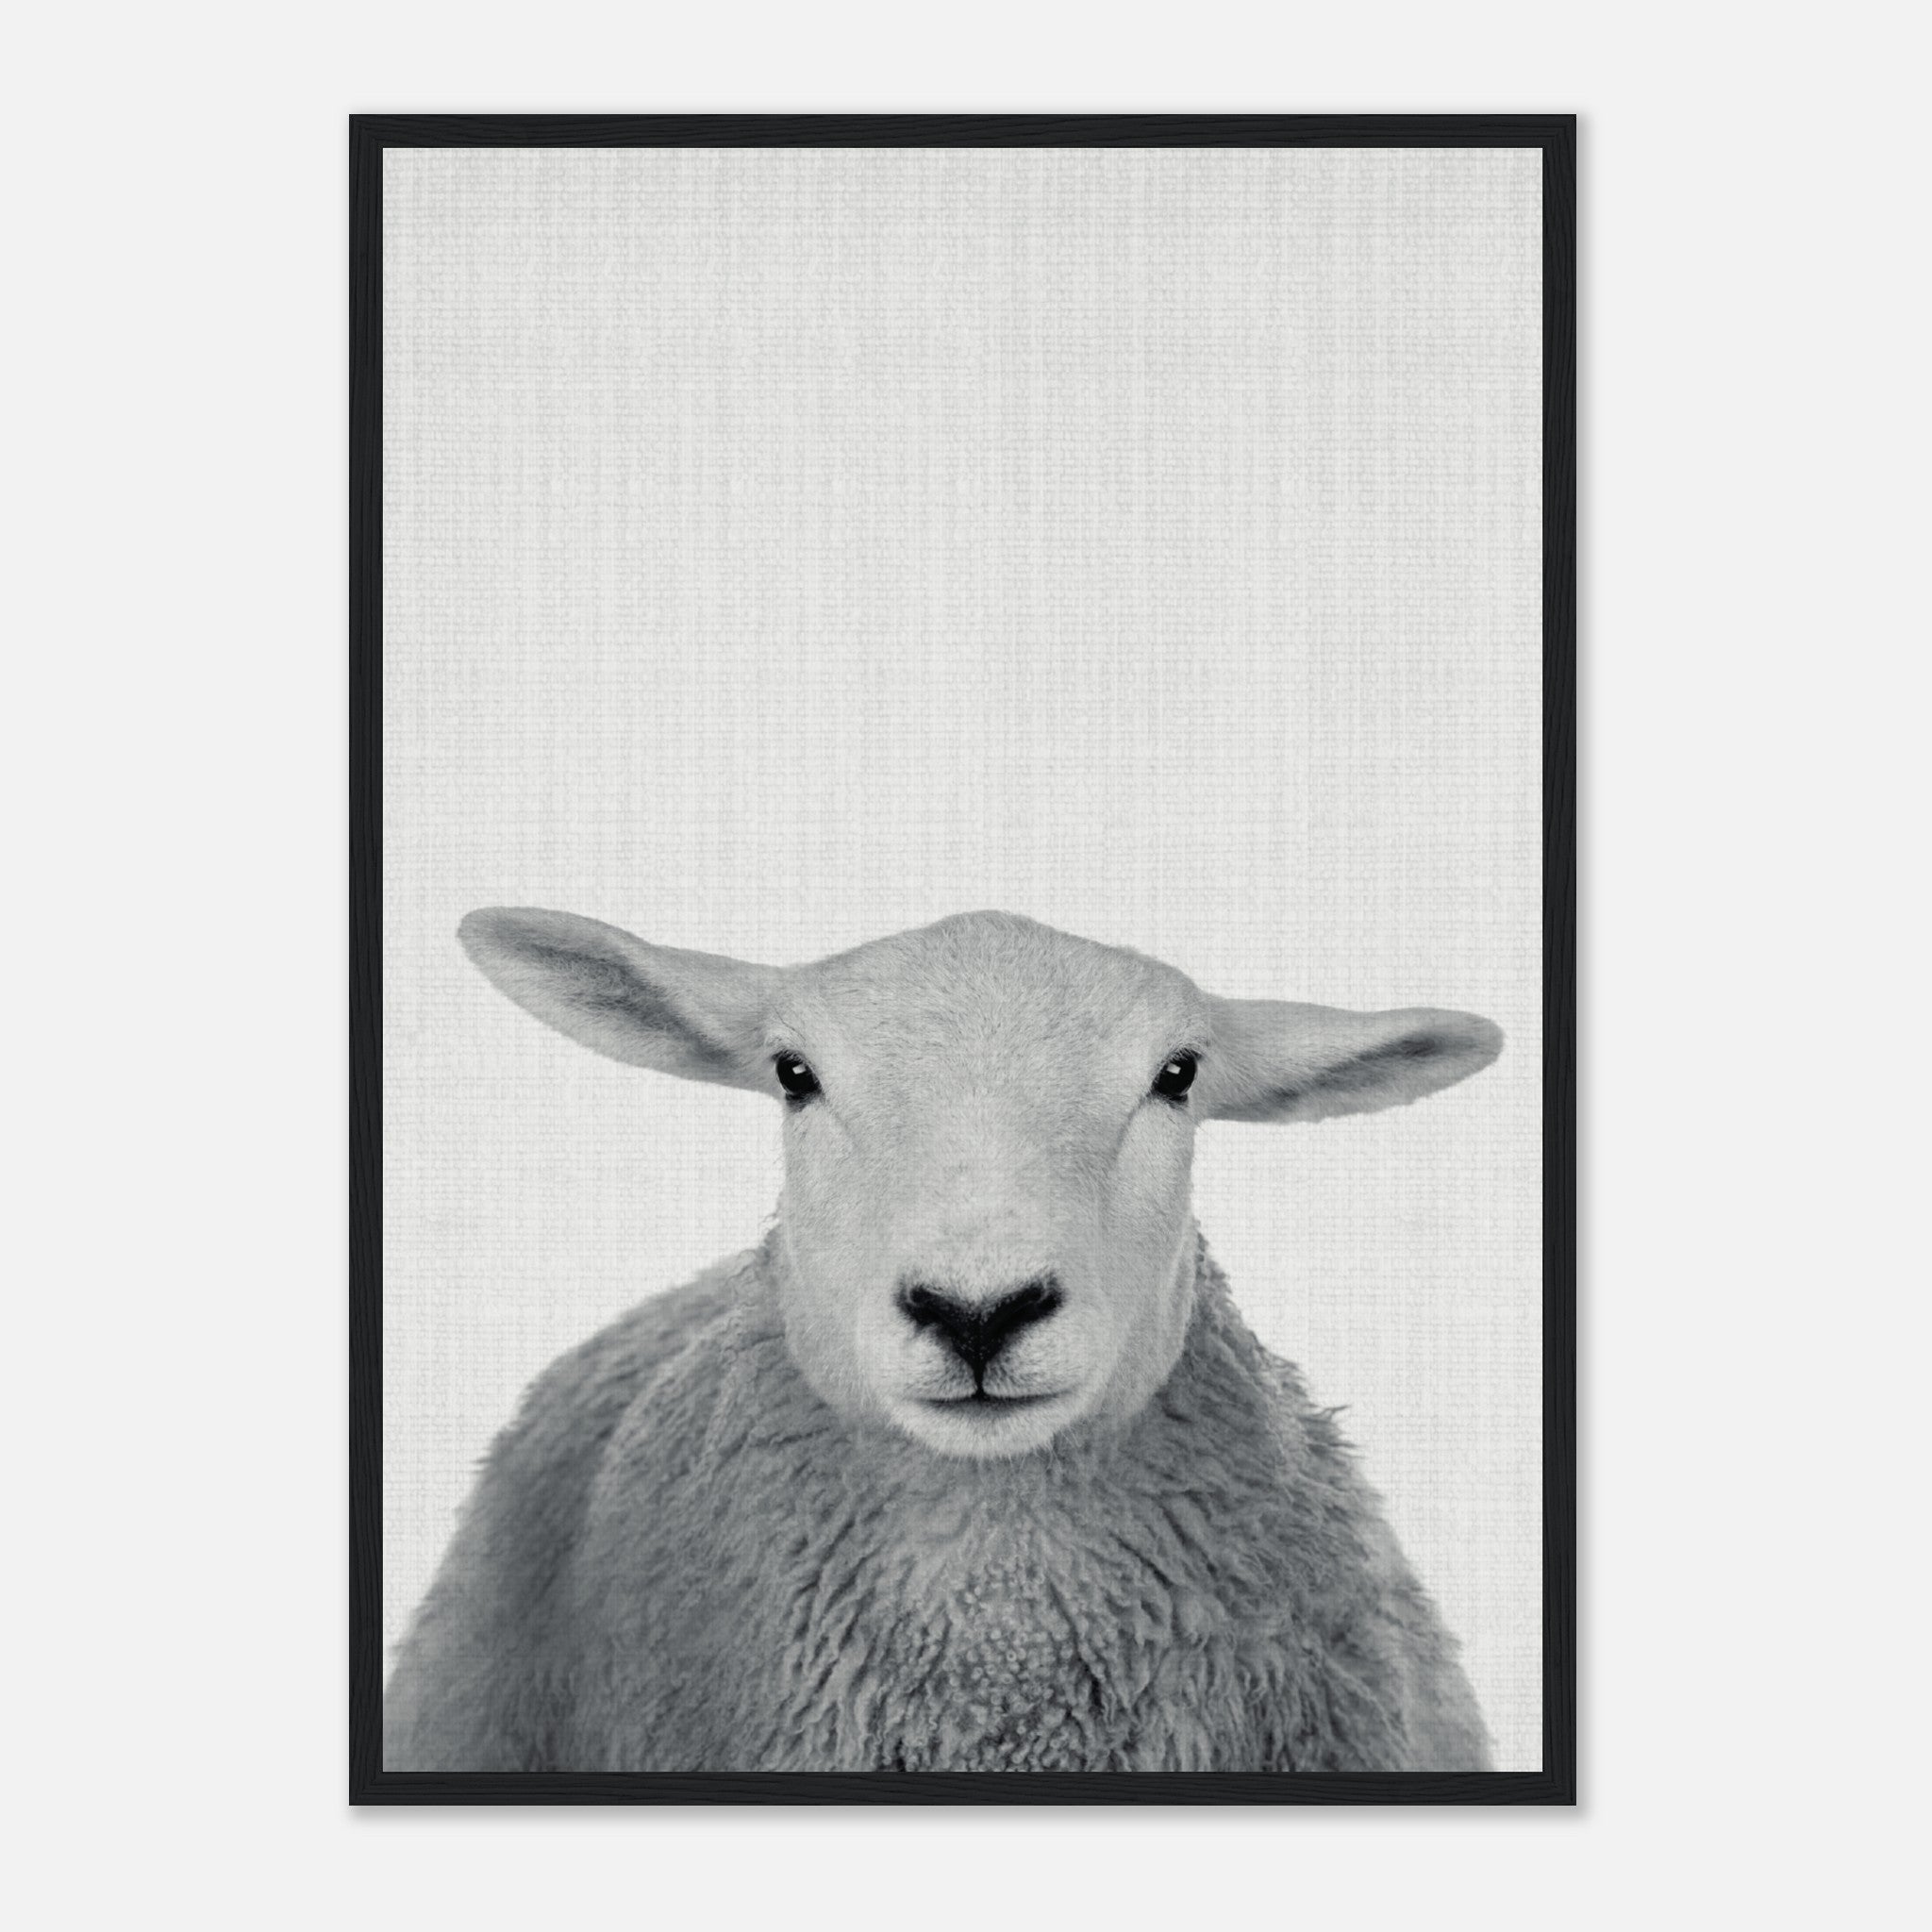 Trust this wise sheep Poster